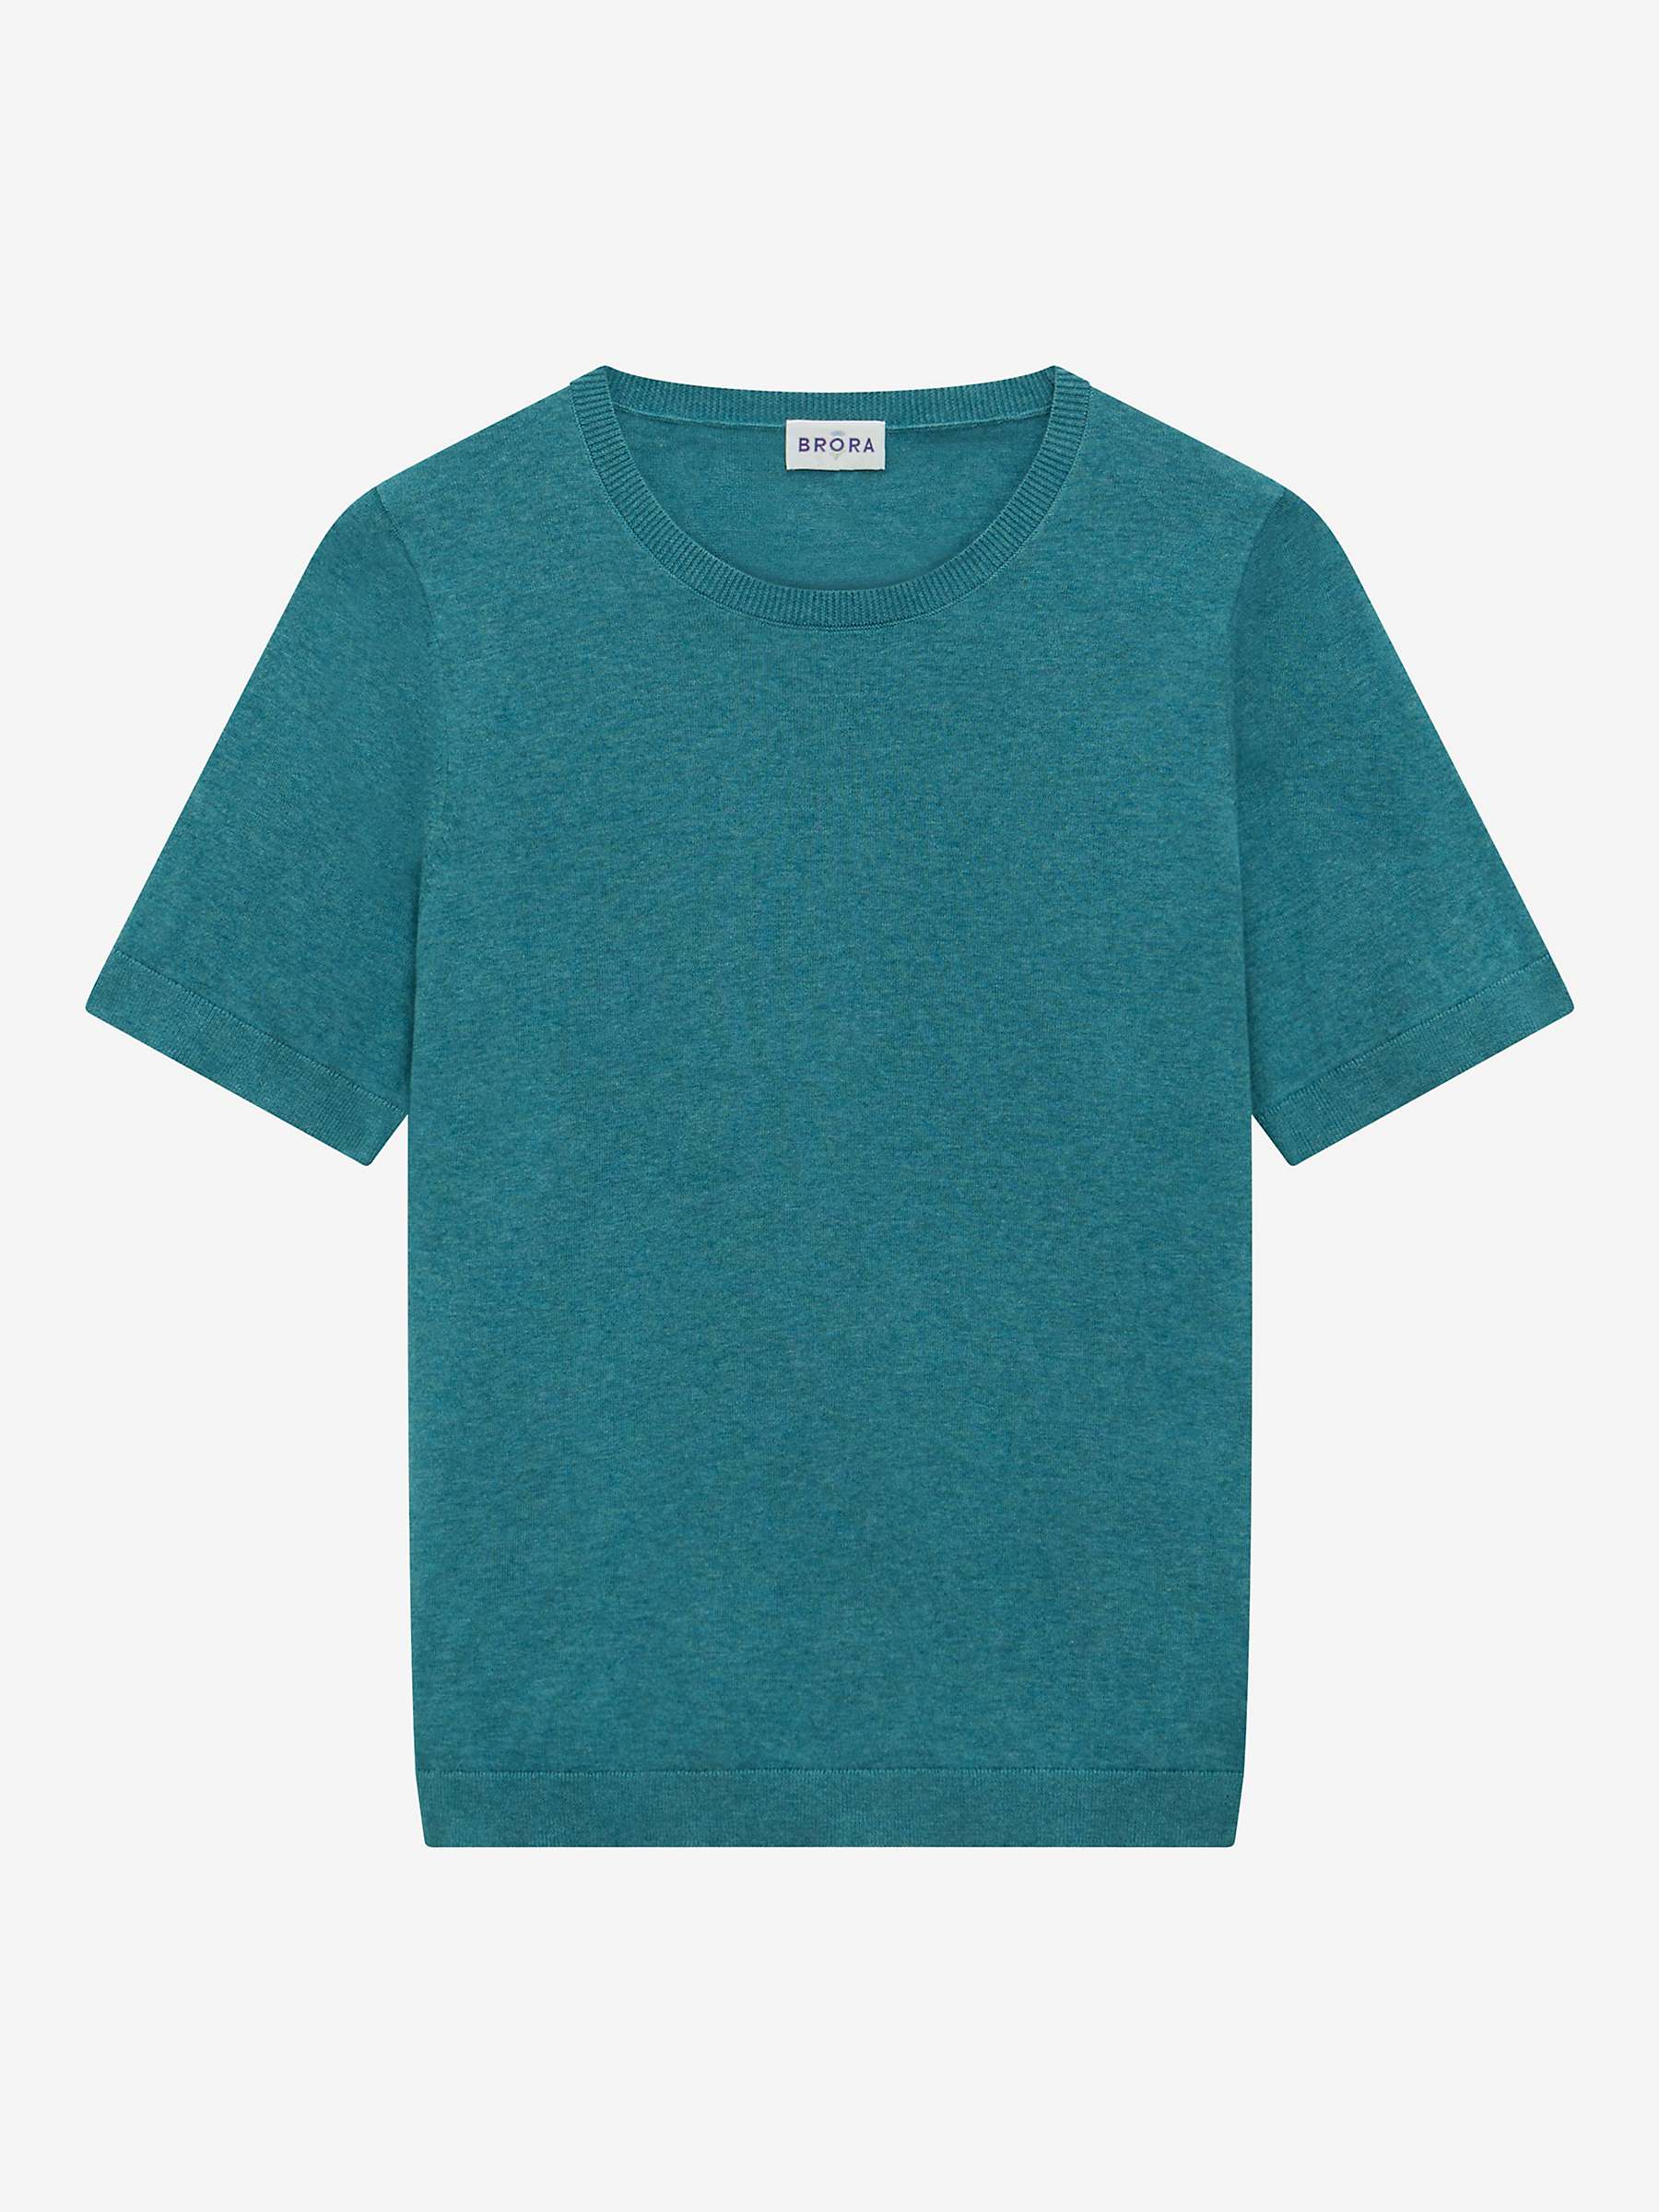 Buy Brora Cotton Knitted Short Sleeve Top Online at johnlewis.com